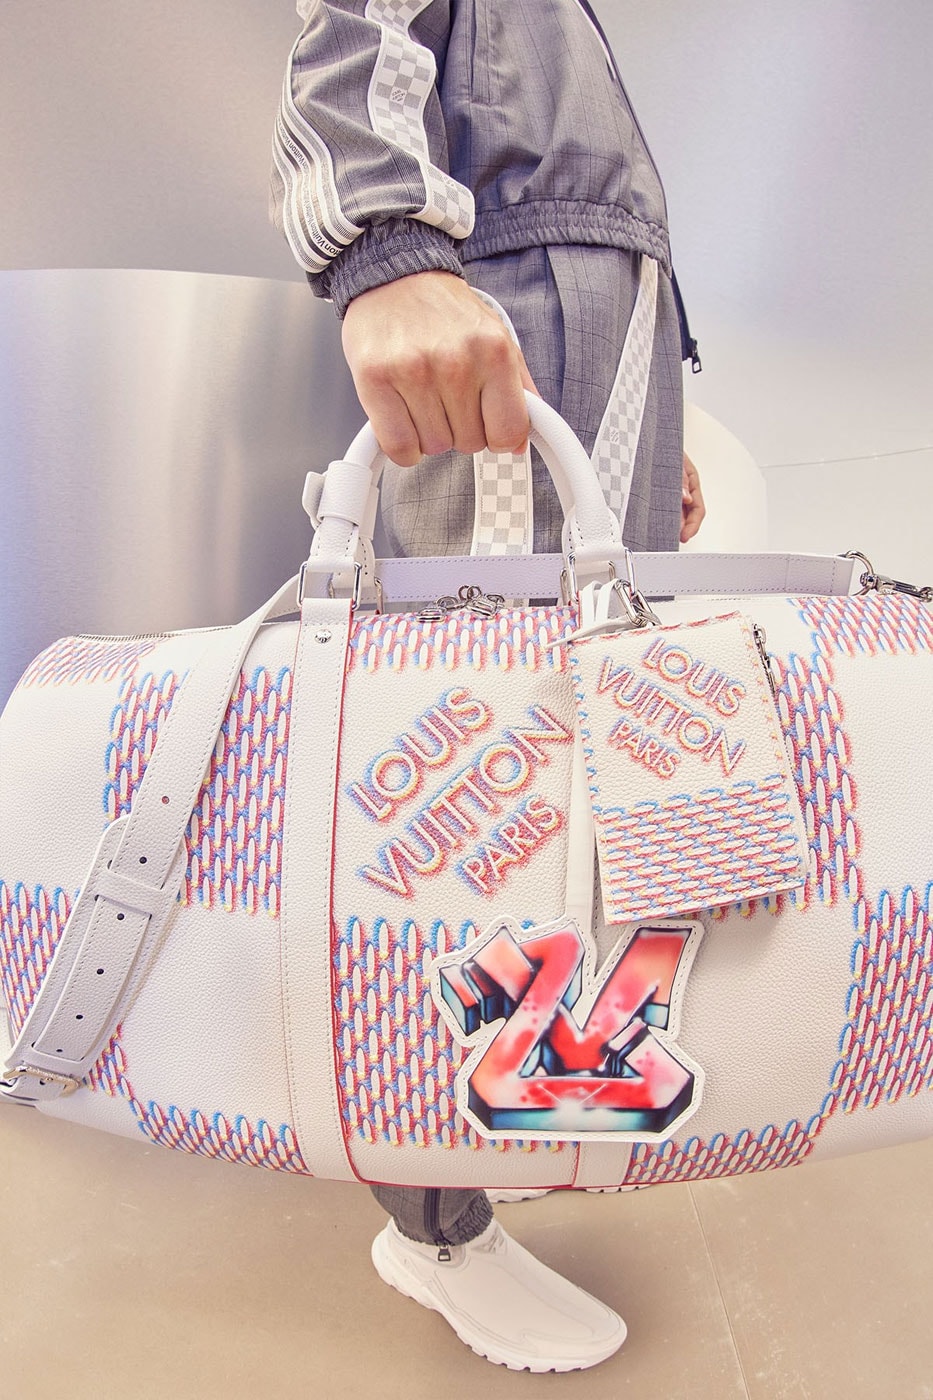 First Drop of Virgil Abloh's Final Louis Vuitton's Pre-FW22 Collection Has Arrived ghusto leon lvmh high fashion luxury